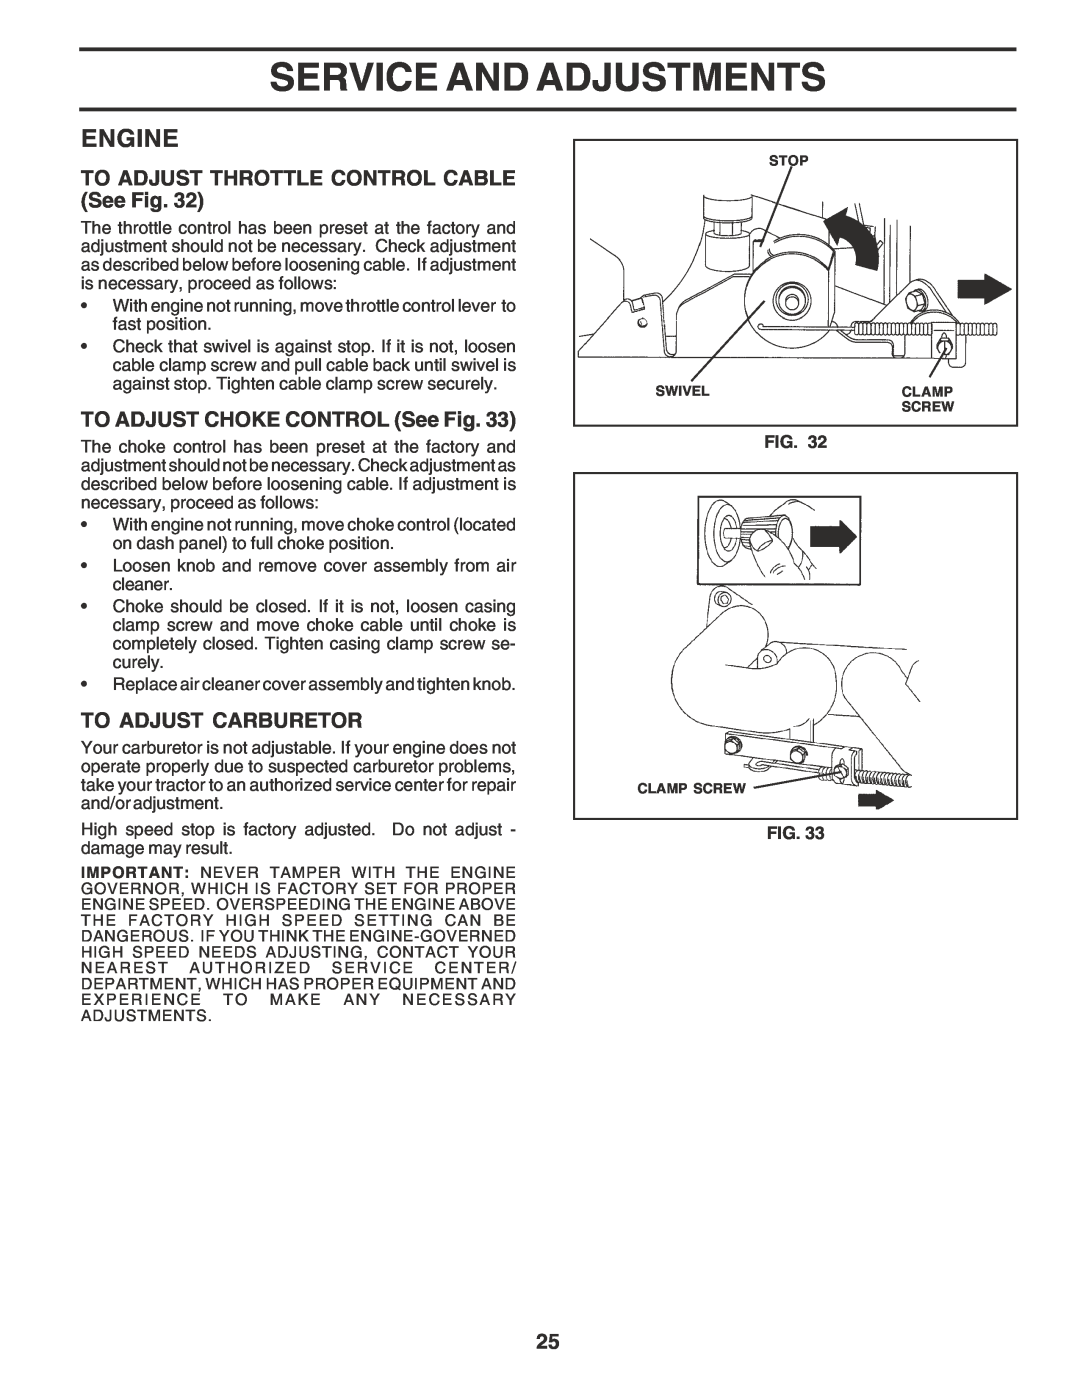 Poulan 183050 TO ADJUST THROTTLE CONTROL CABLE See Fig, TO ADJUST CHOKE CONTROL See Fig, To Adjust Carburetor, Engine 